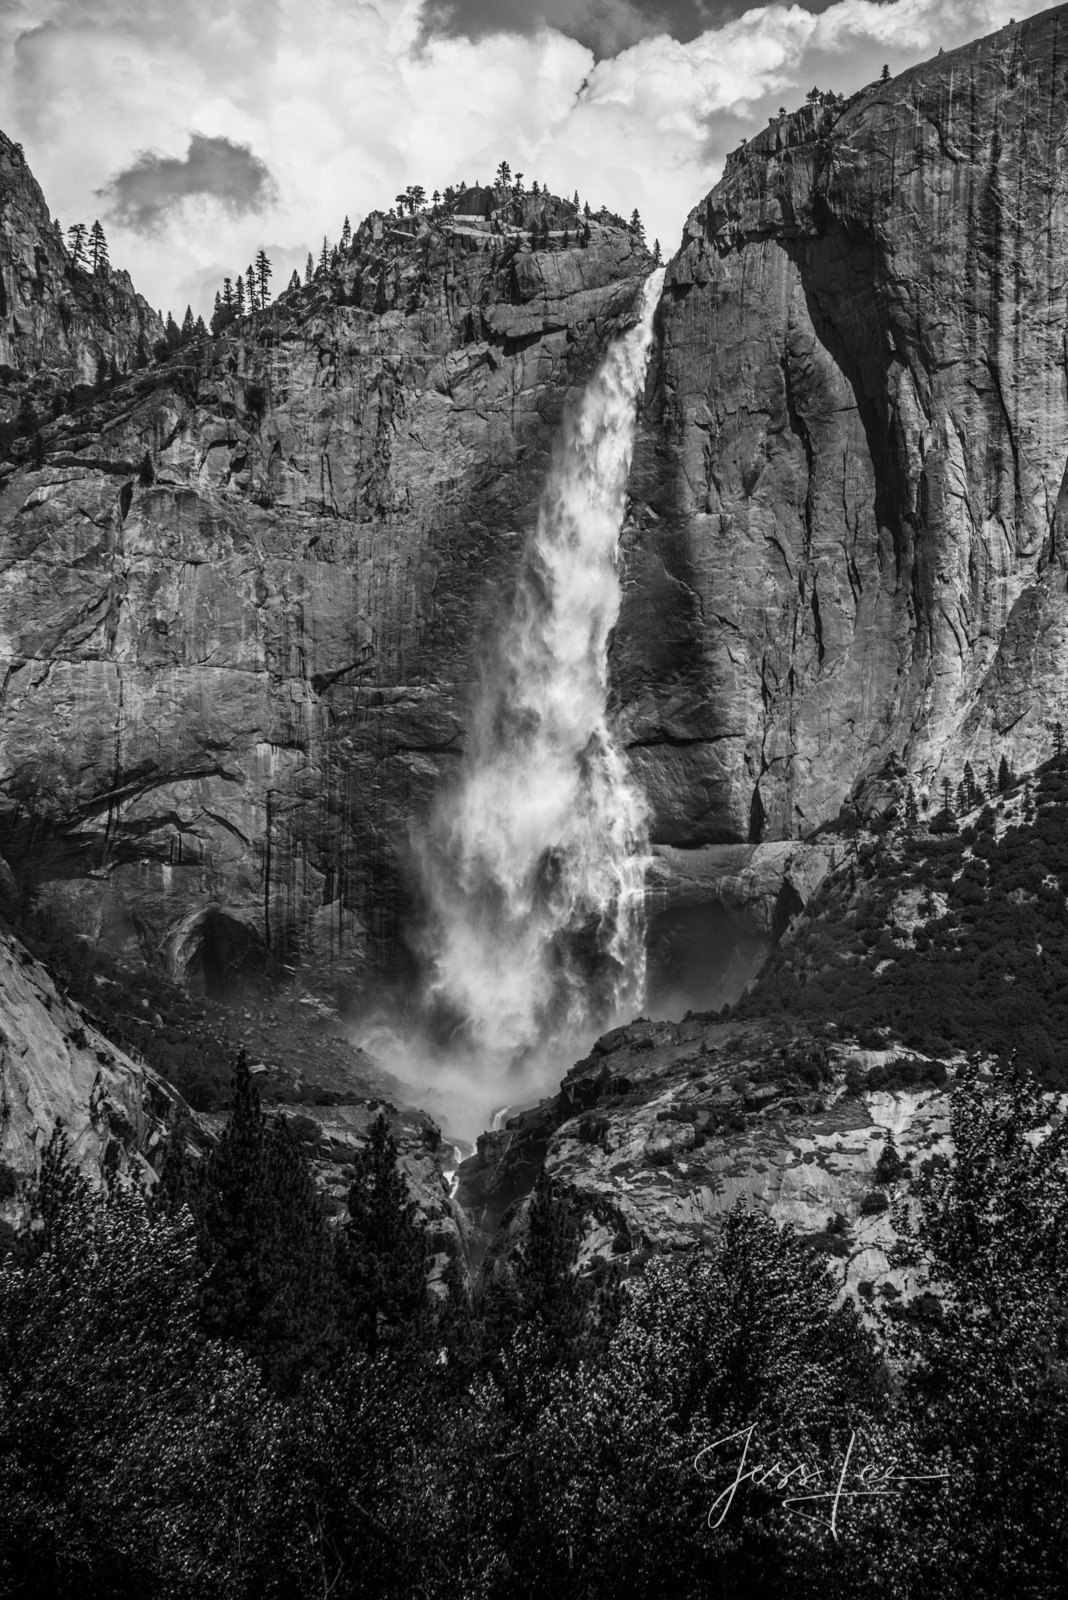 Yosemite Black and White Photography Print of Yosemite Falls. A      limited to 200 fine art high resolution  prints. Enjoy the...